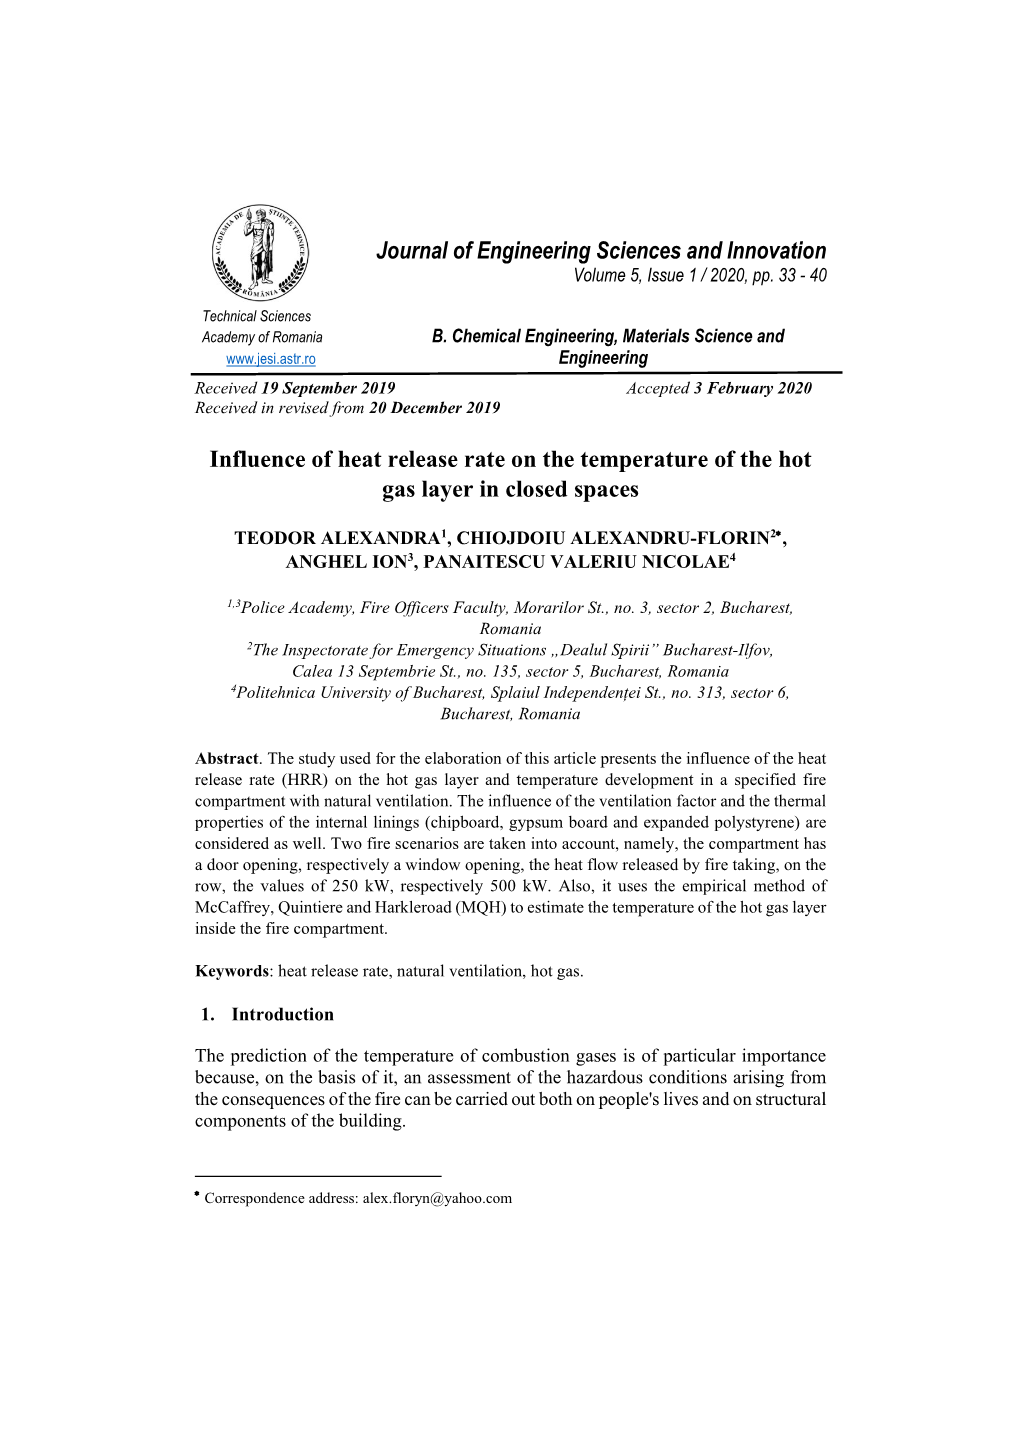 Journal of Engineering Sciences and Innovation Influence of Heat Release